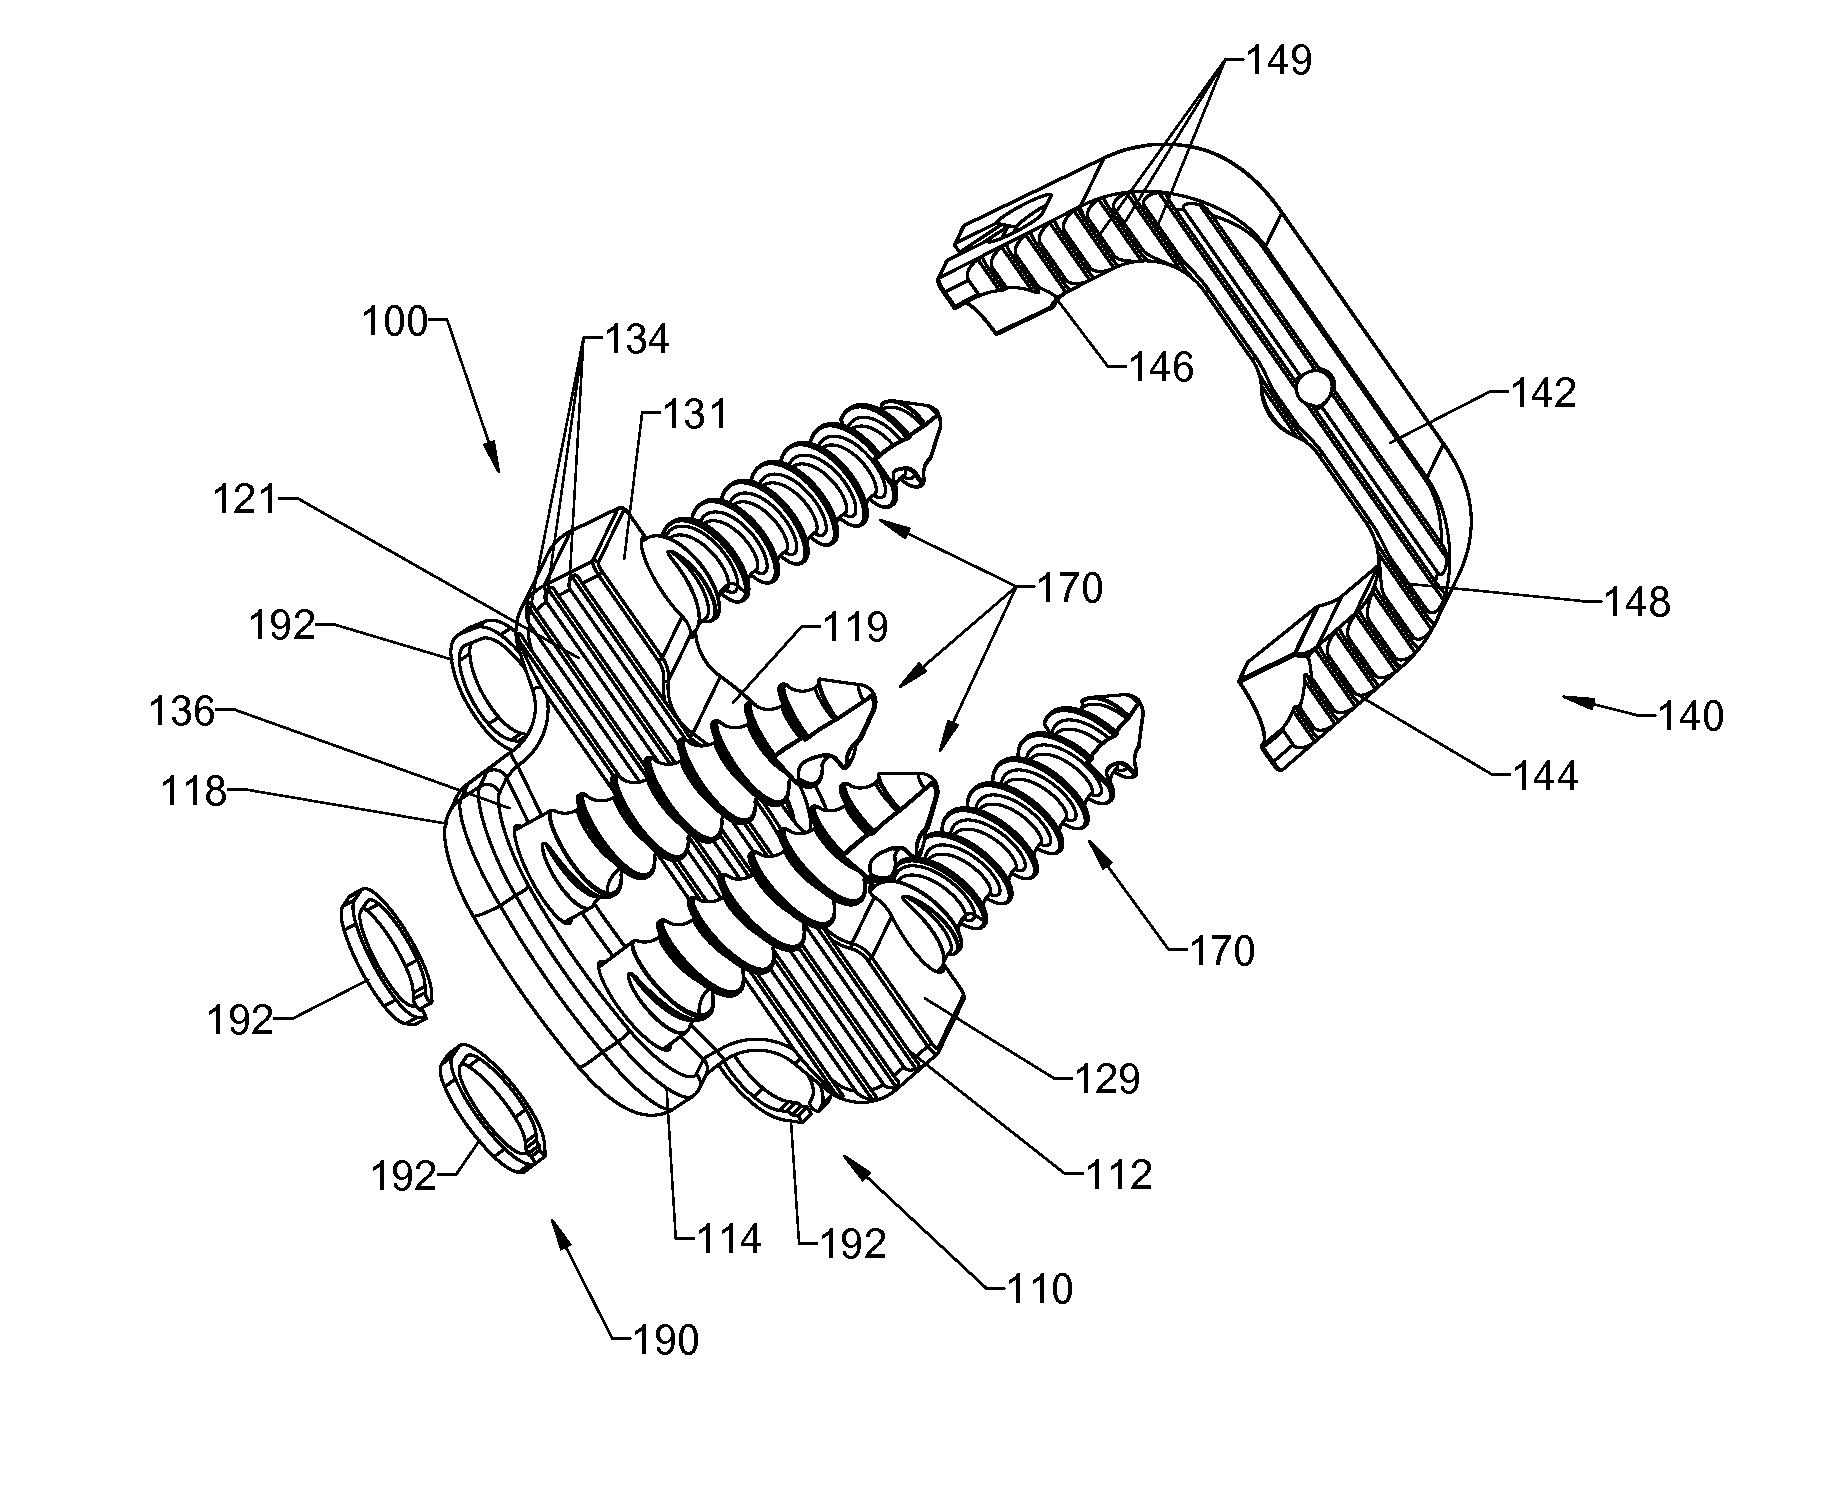 Spinal implants, spinal implant kits, and surgical methods